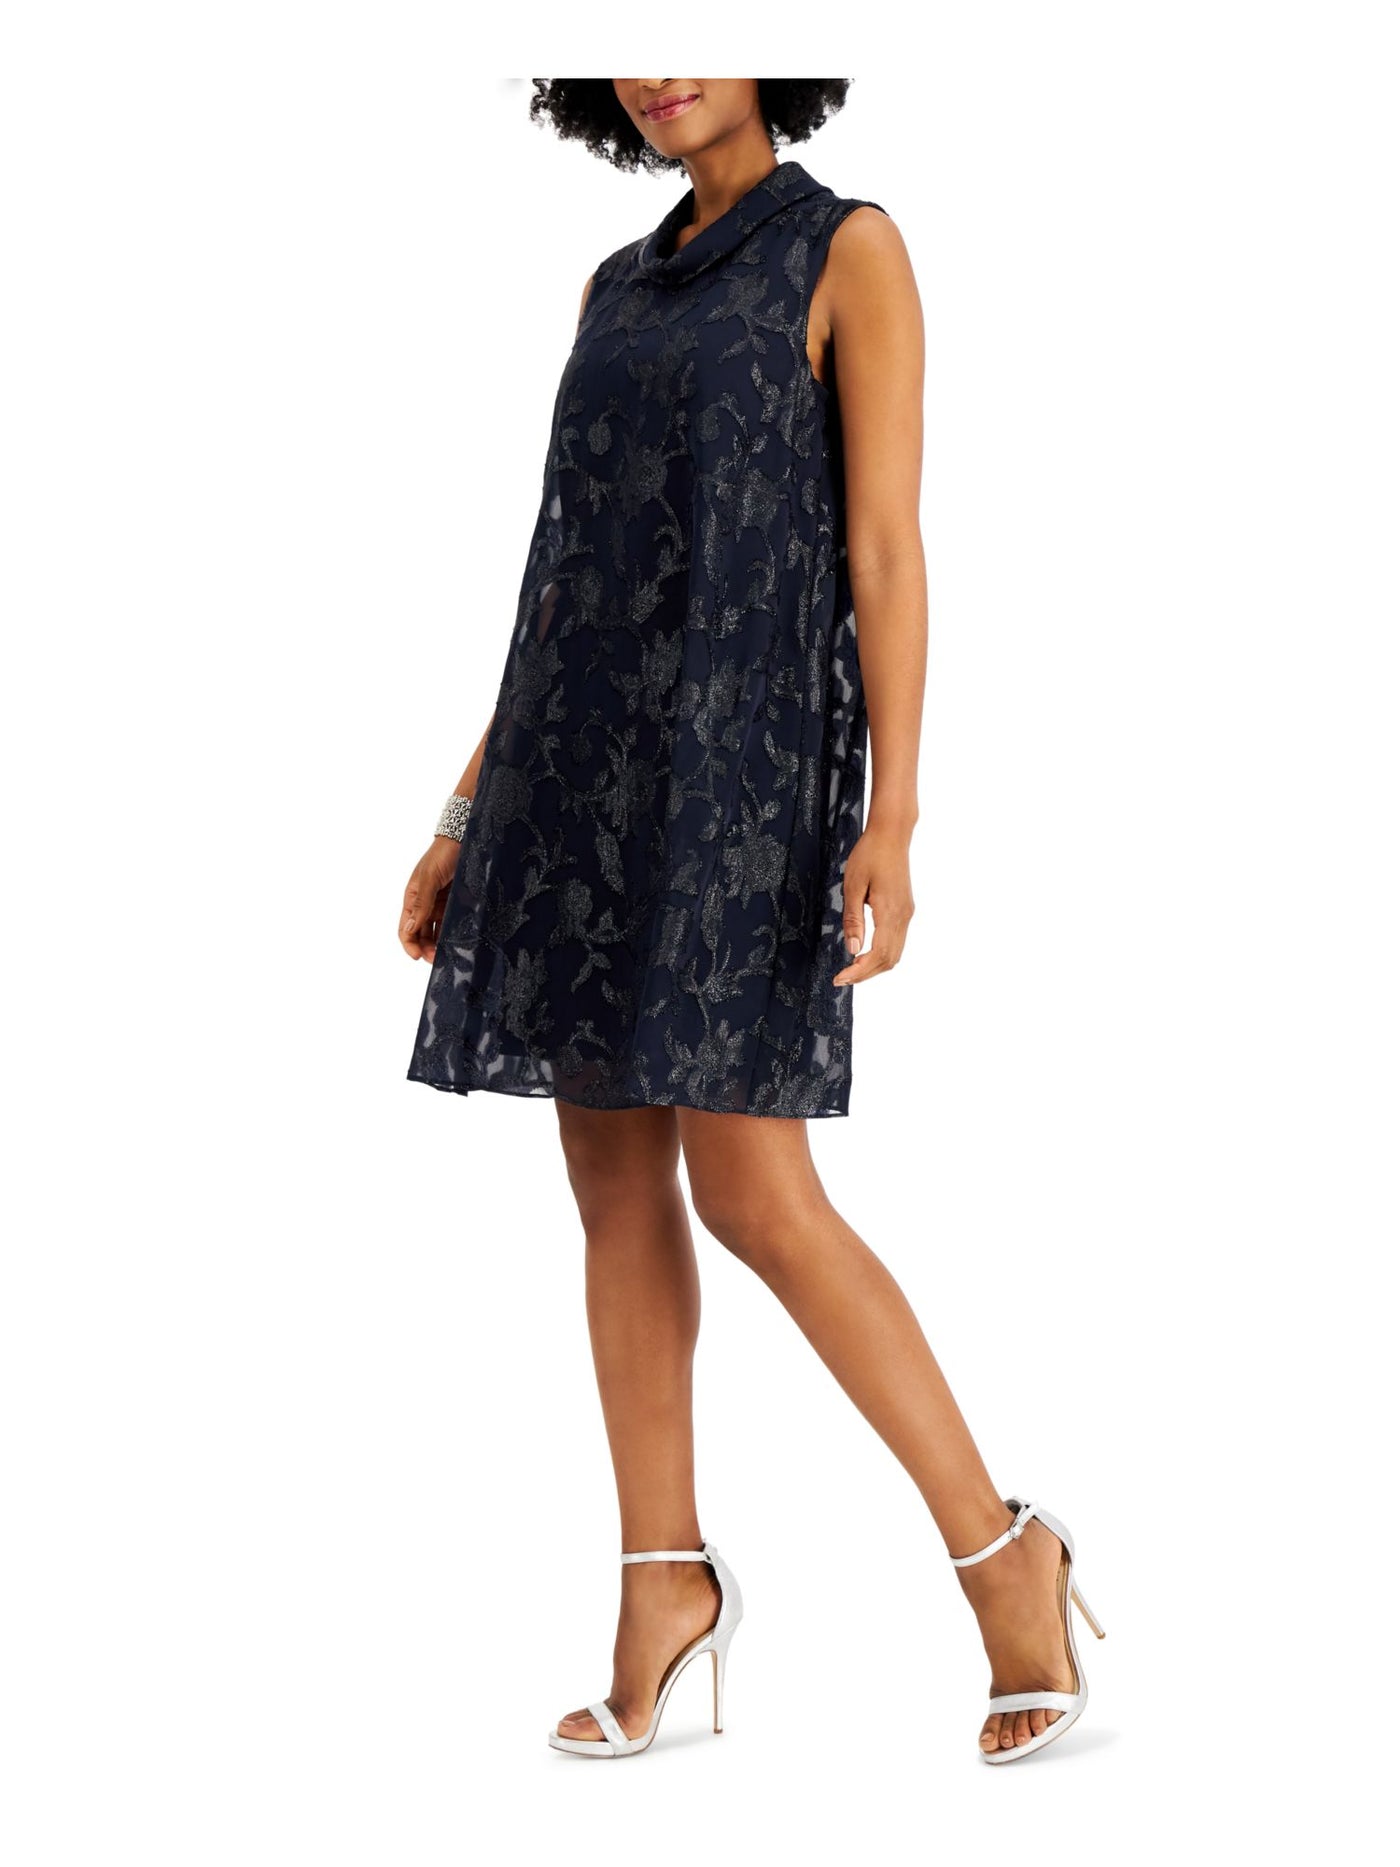 CONNECTED APPAREL Womens Navy Floral Sleeveless Above The Knee Cocktail Shift Dress 8